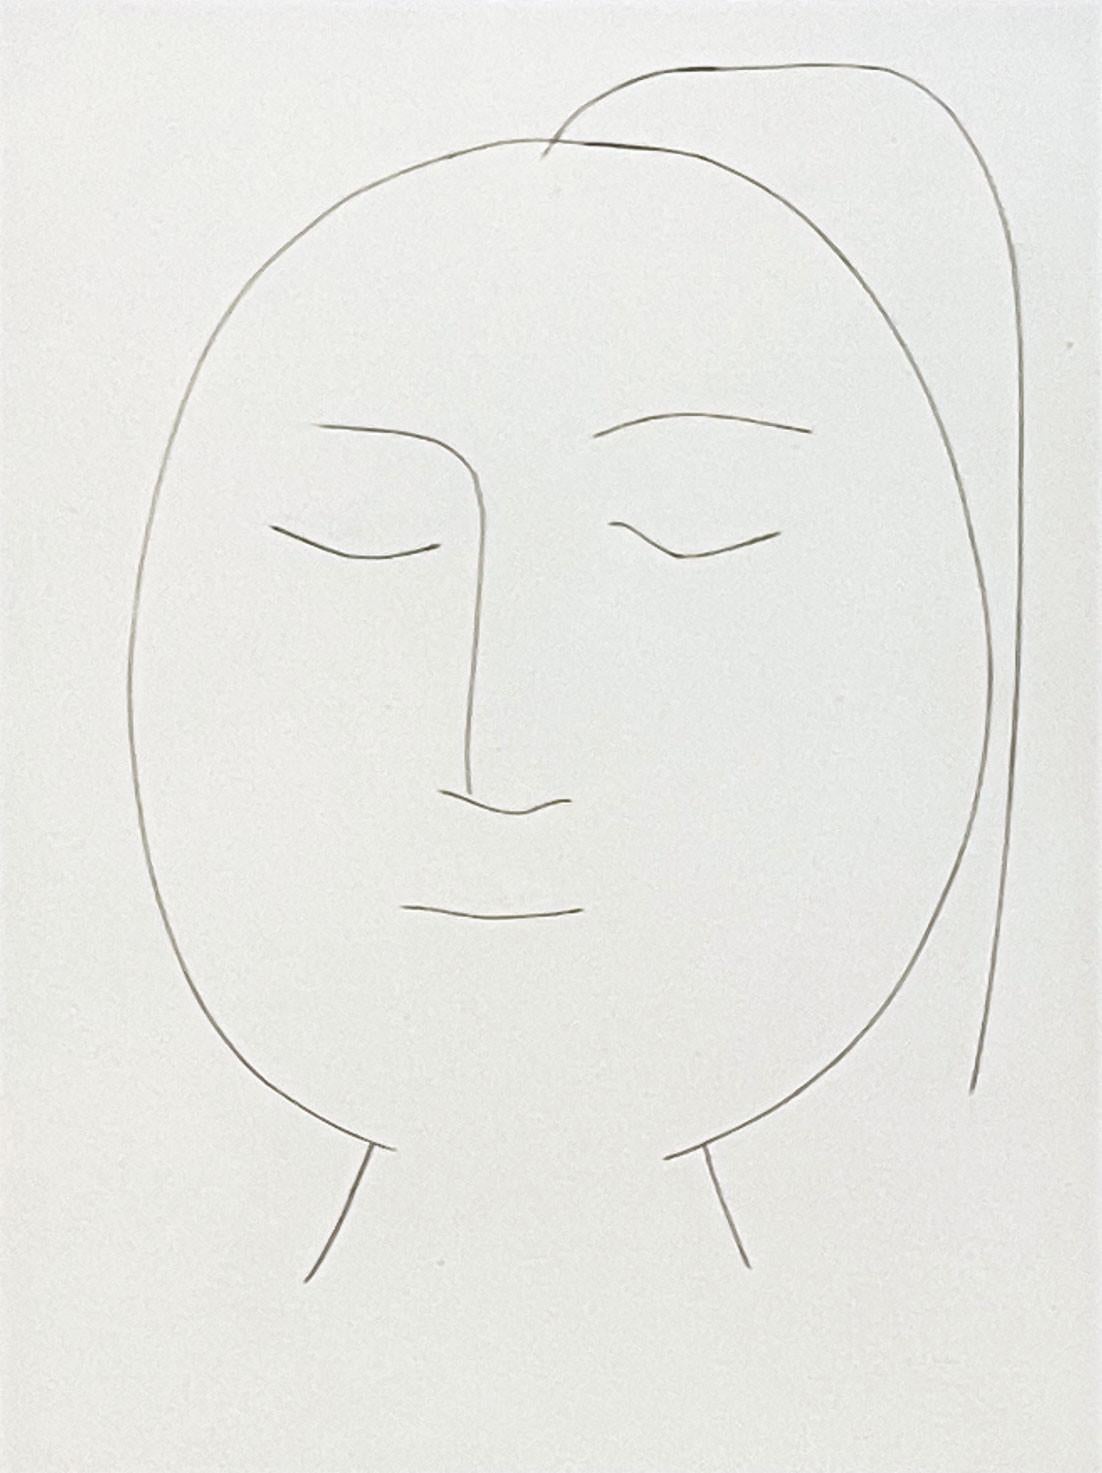 Pablo Picasso Portrait Print - Oval Head of a Woman with Hair (Plate XIX), from Carmen